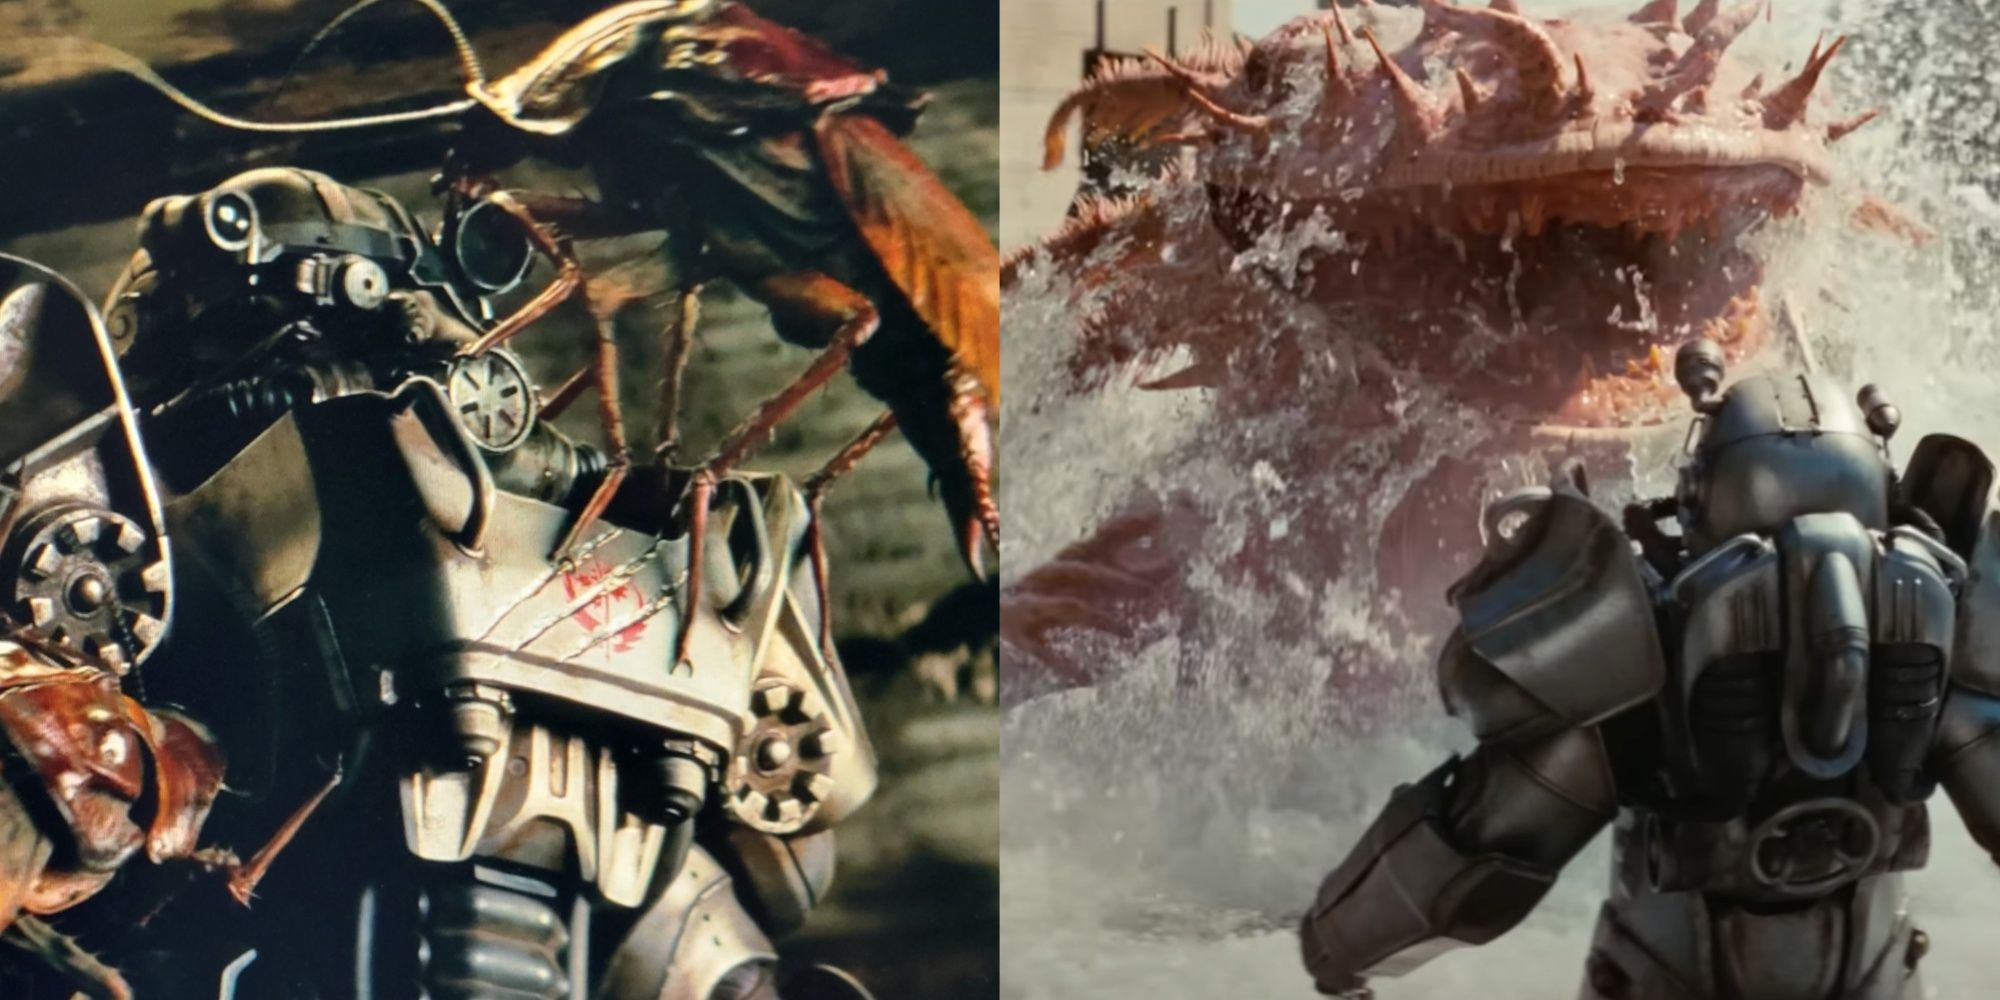 Split-image of Radroaches attacking Maximus in Brotherhood of Steel power armor and Maximus facing a Gulper jumping out of the water in the same armor.